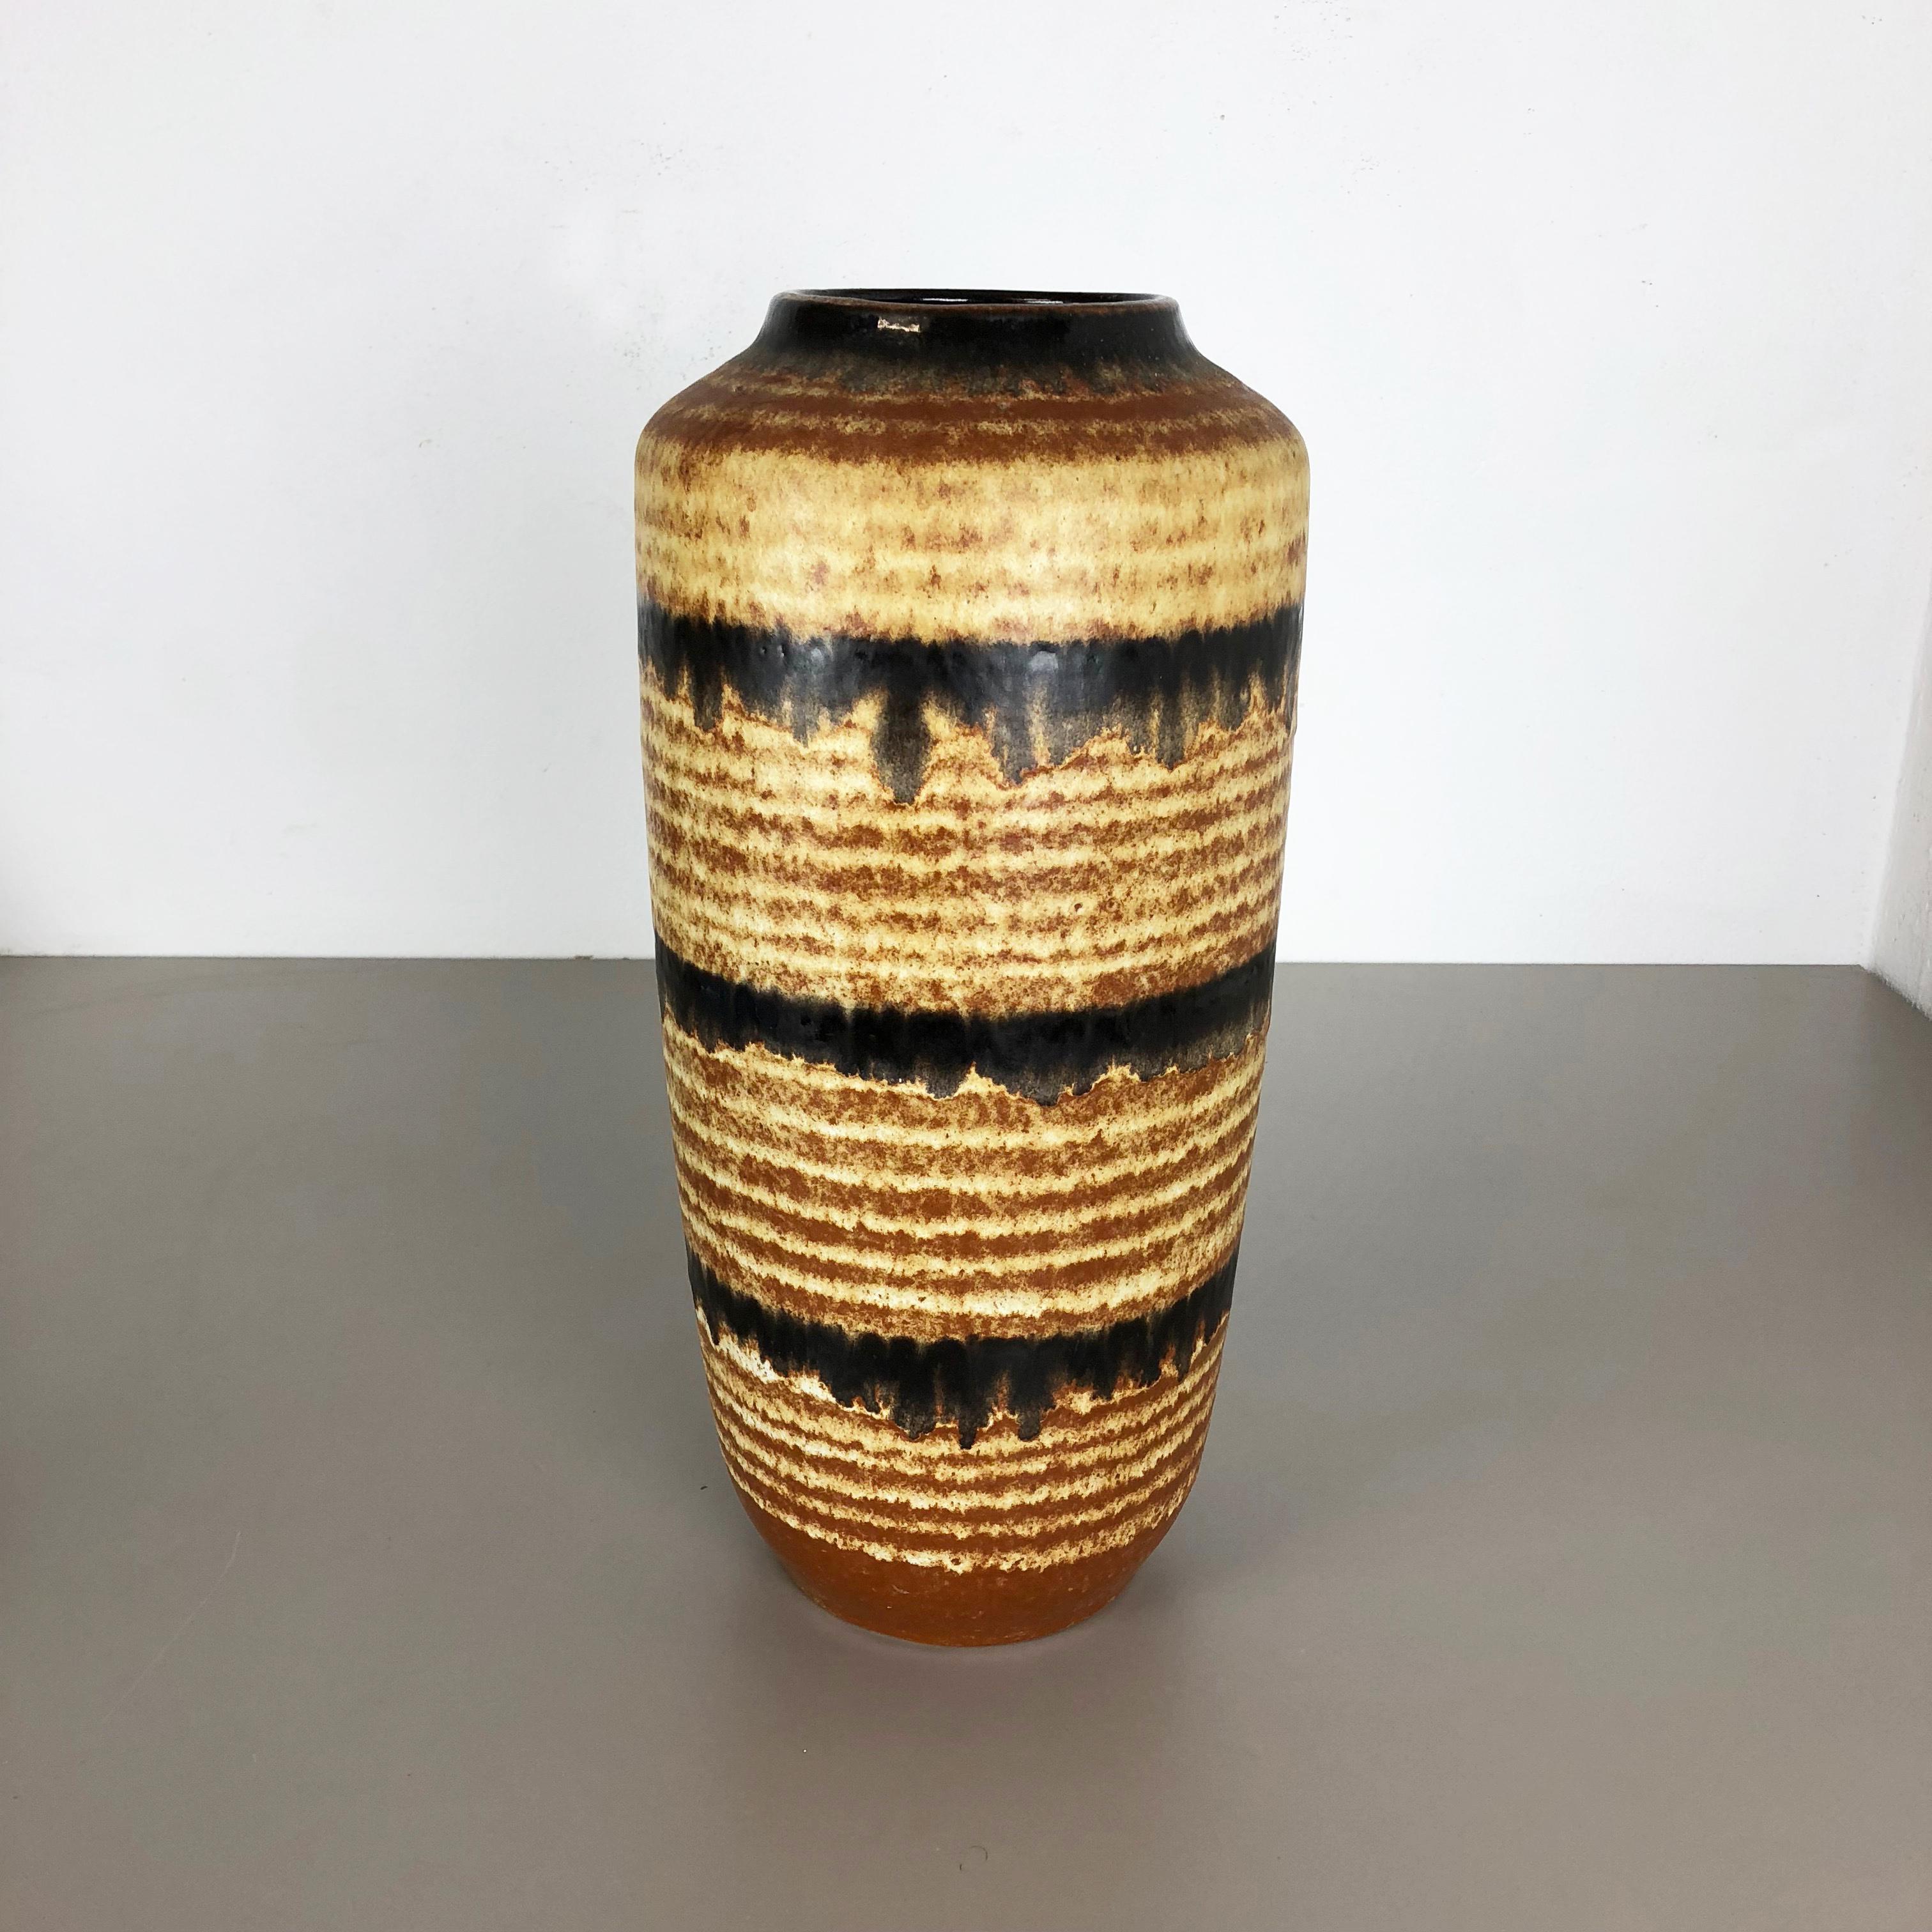 Article:

Fat lava art vase XXXL version


Model: 517-45


Producer:

Scheurich, Germany



Decade:

1970s


Description:

This original vintage vase was produced in the 1970s in Germany. It is made of ceramic pottery in fat